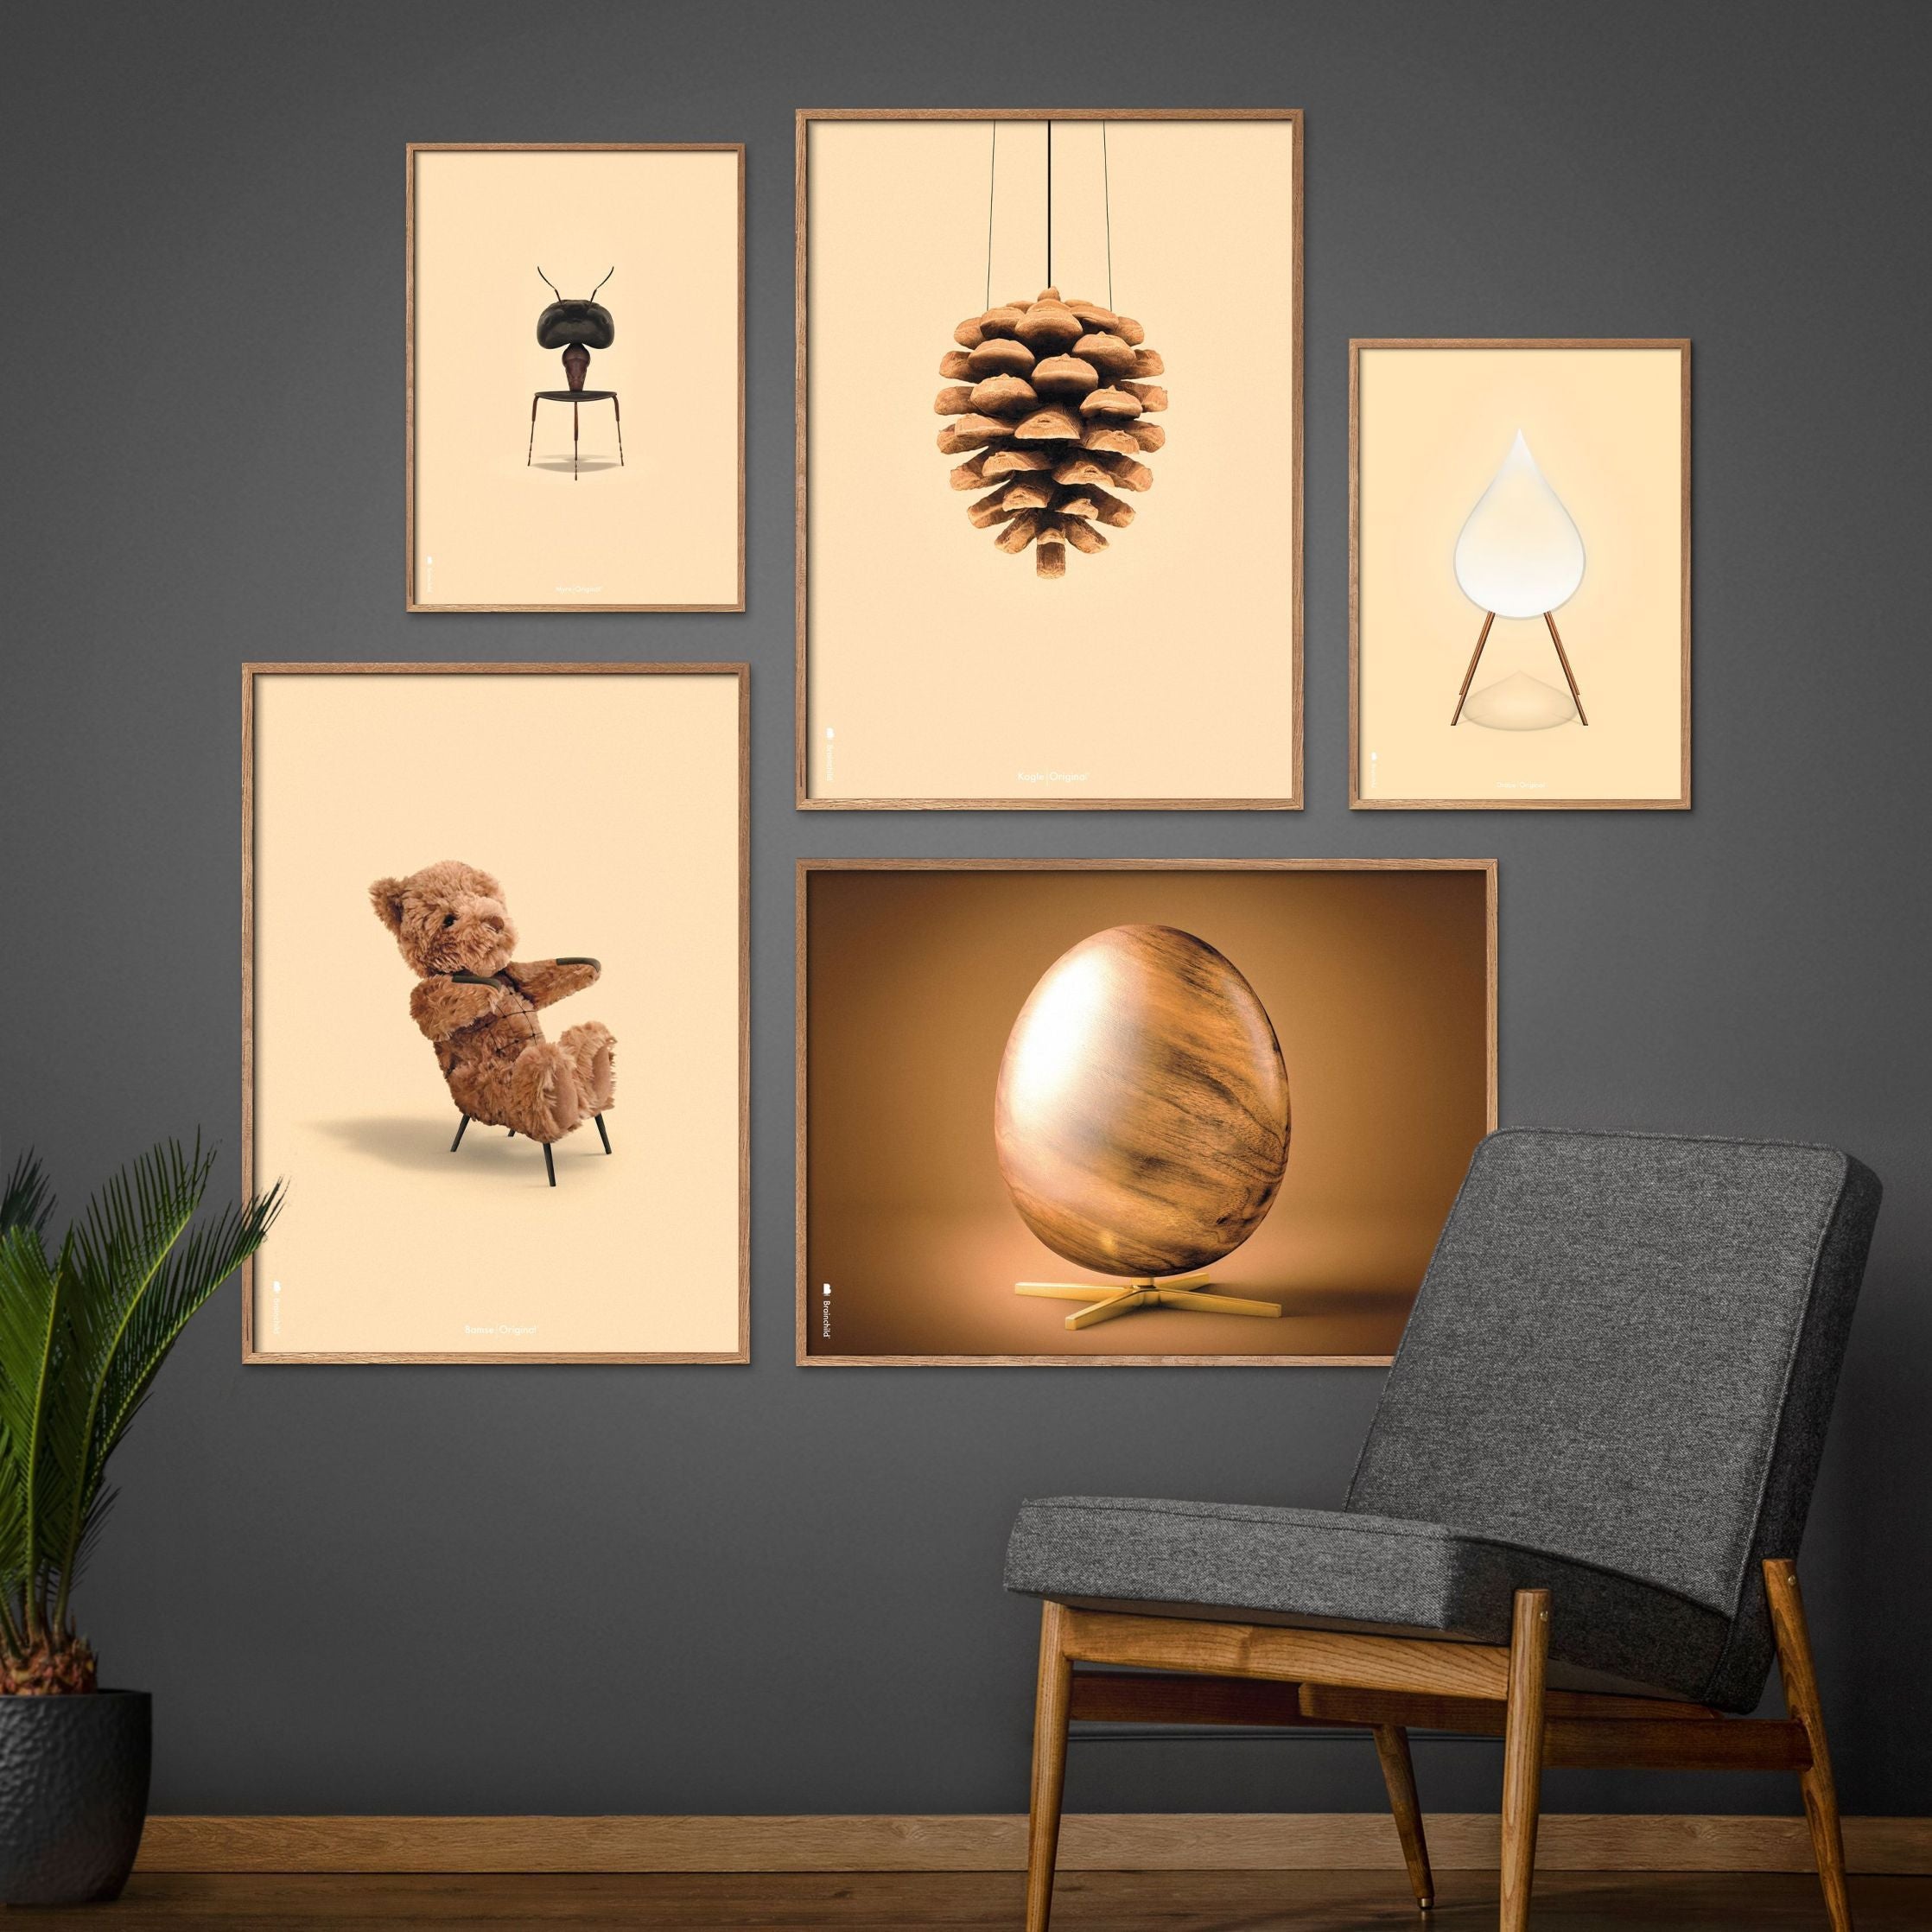 Brainchild Ant Classic Poster, Frame In Black Lacquered Wood 50x70 Cm, Sand Colored Background